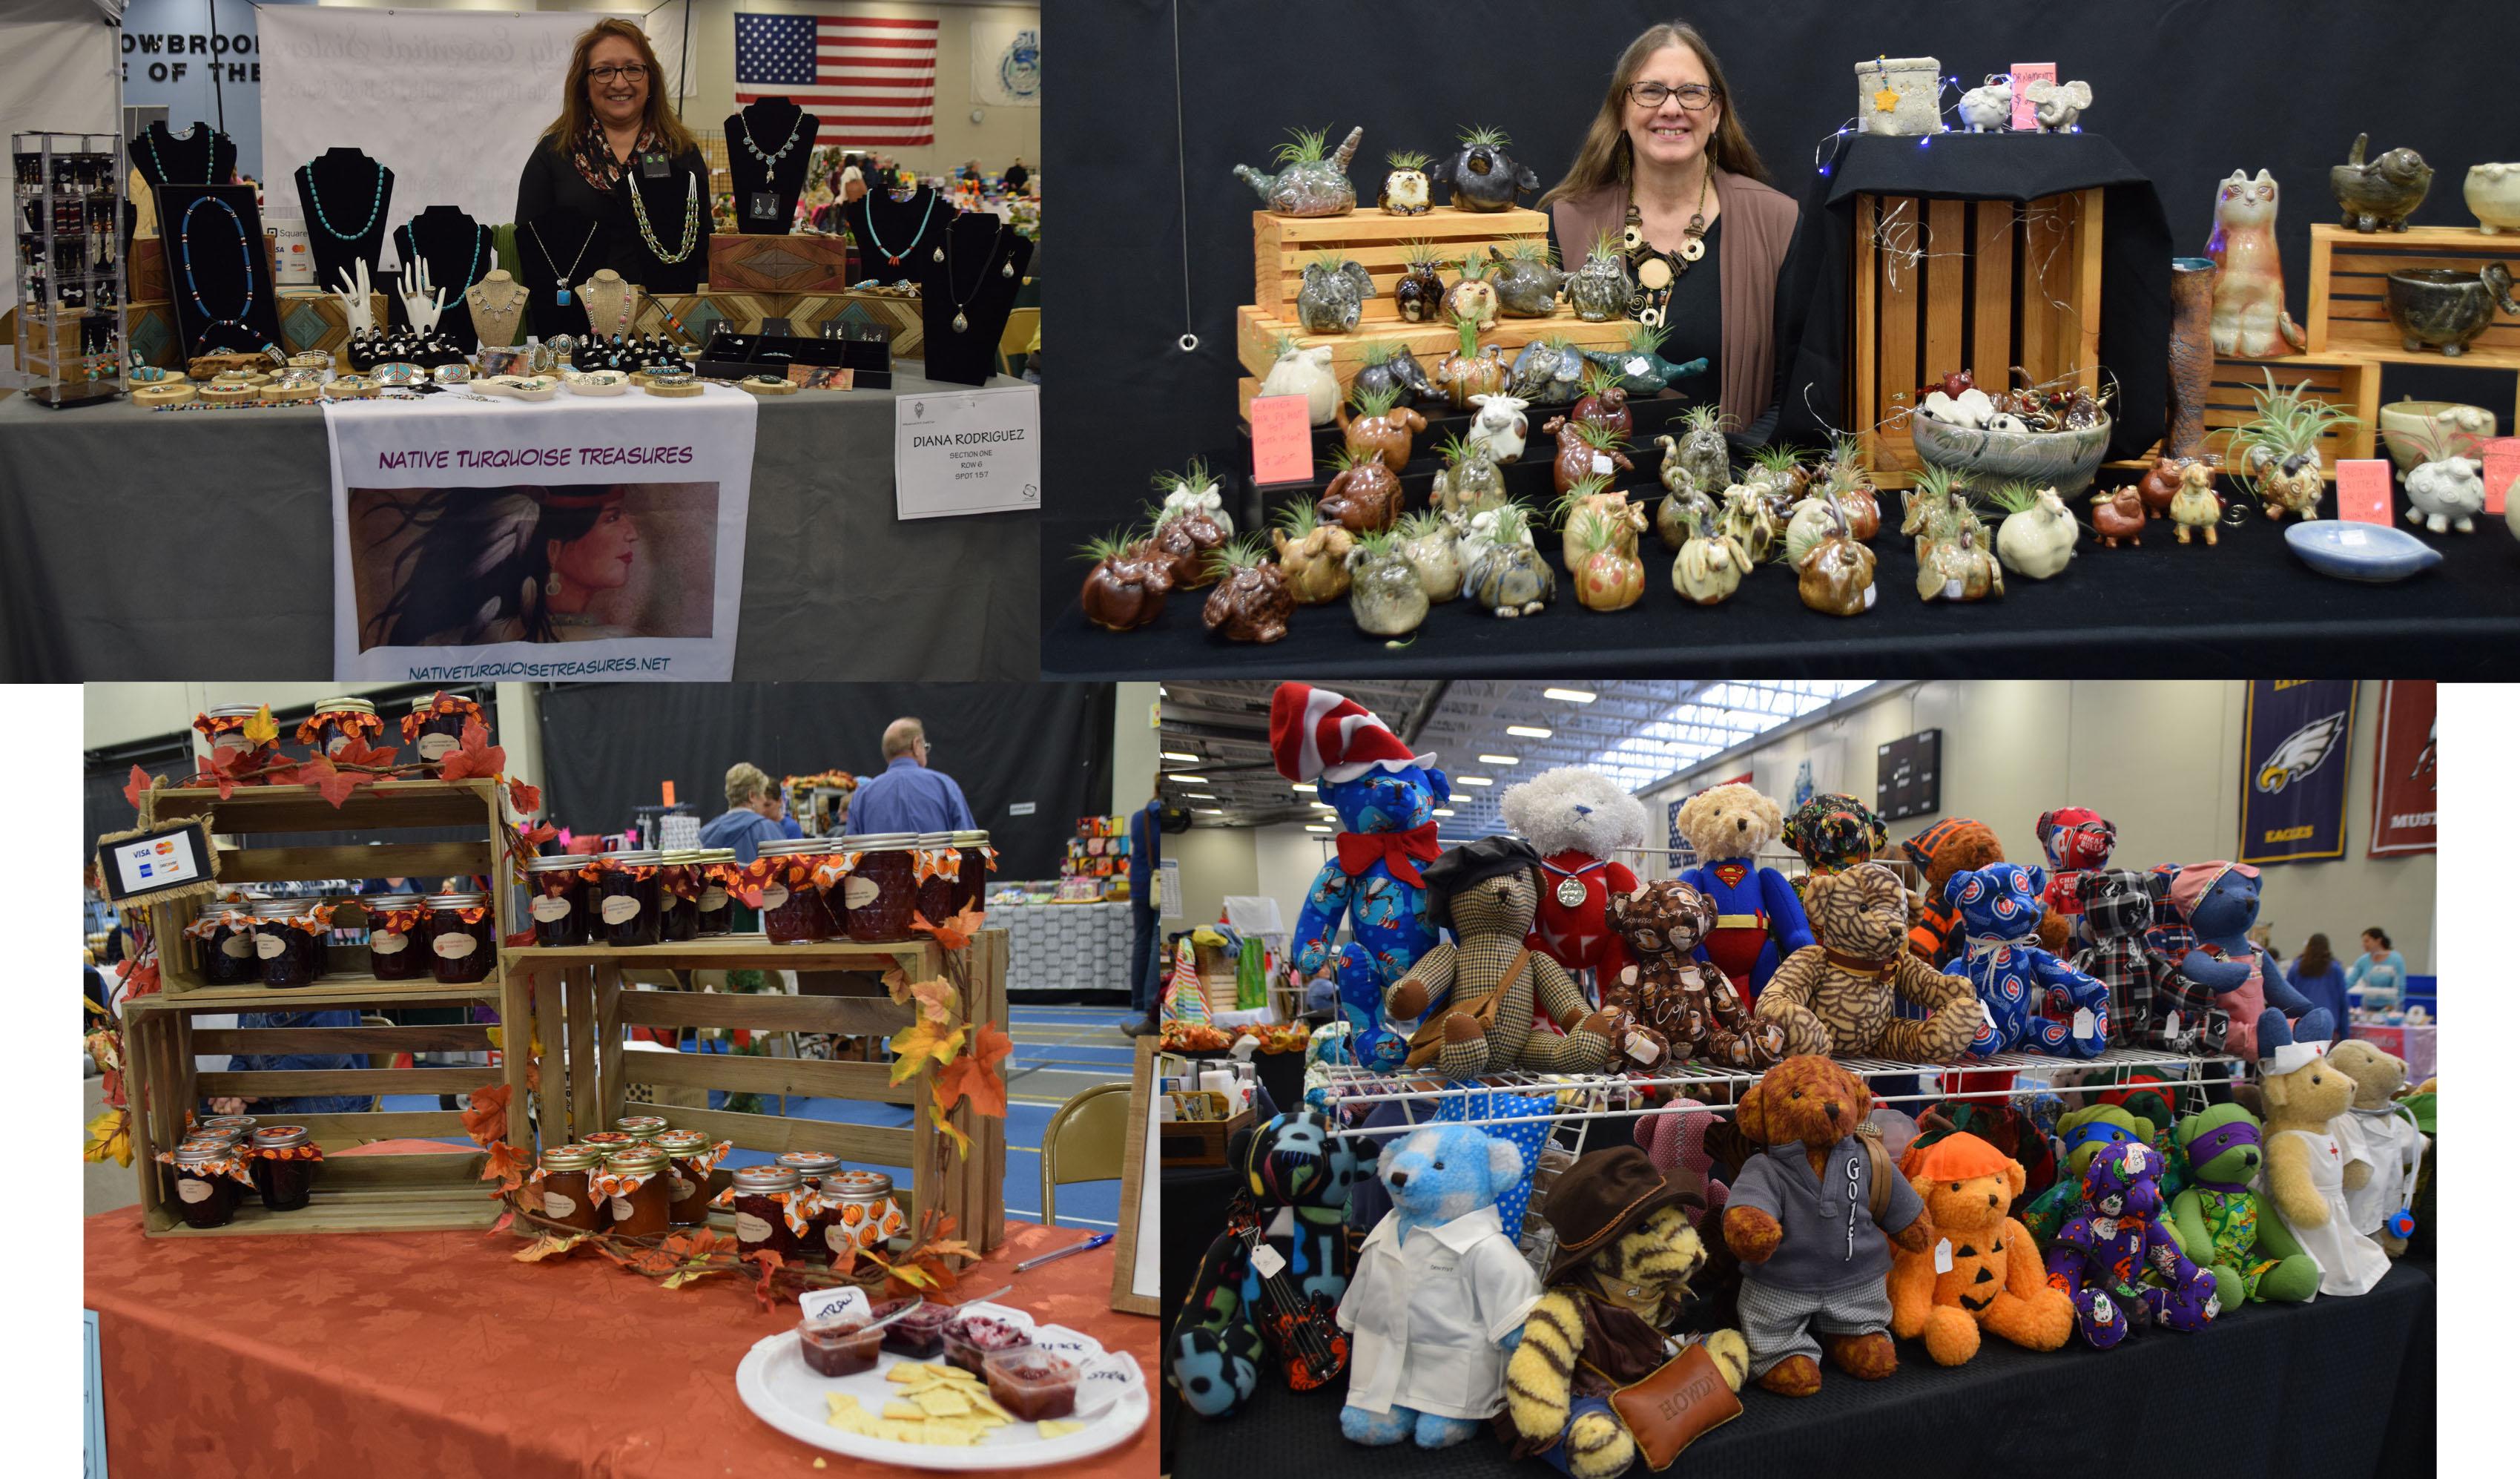 Save the date for the Willowbrook Parent Organization Craft Fair: Vendors can apply by Nov. 3